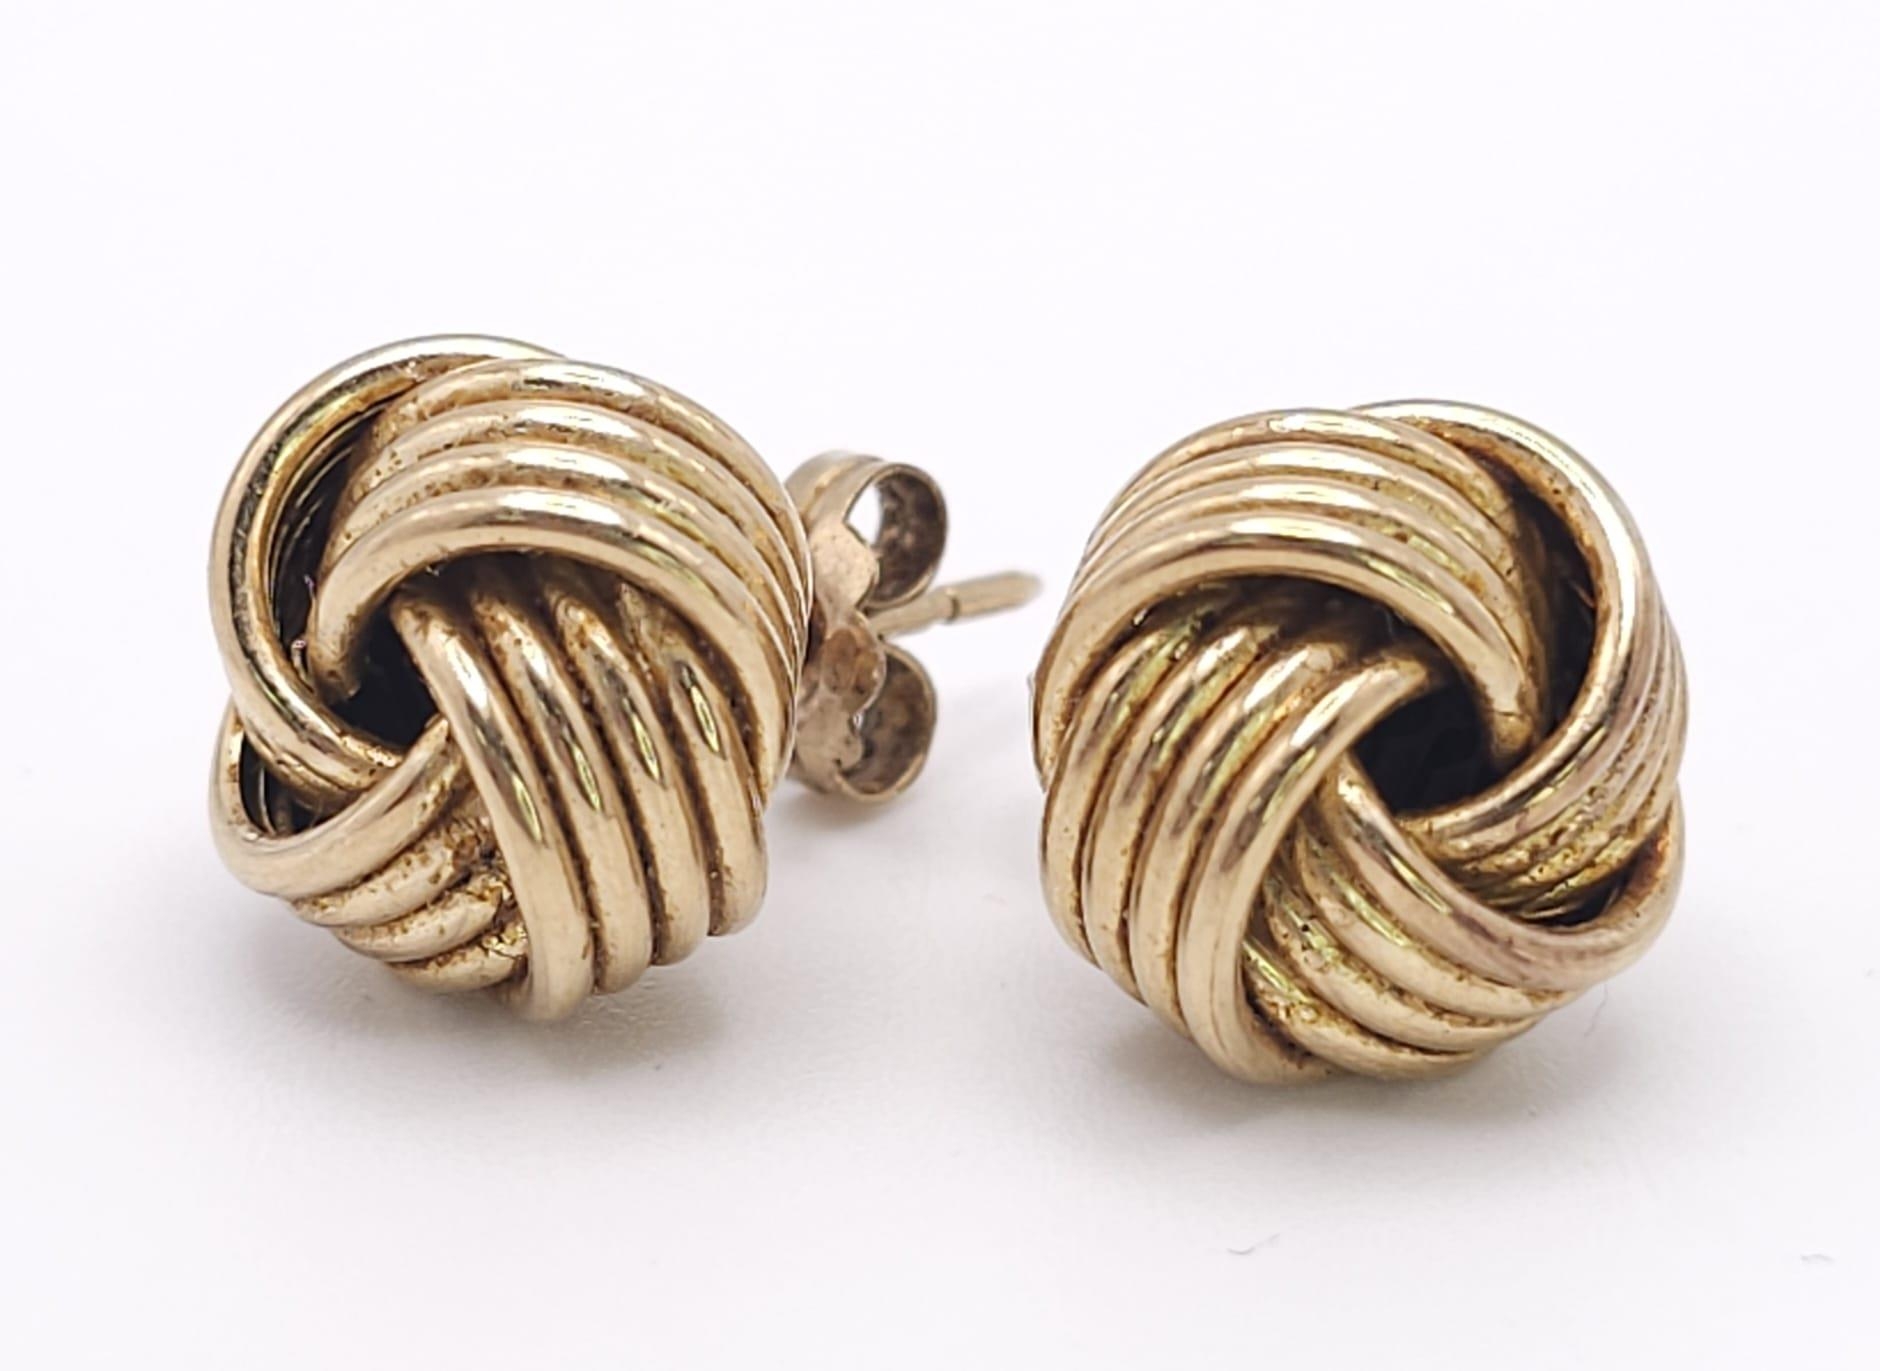 A Pair of 9k Yellow Gold Knot Stud Earrings. 3.8g total weight. Ref: 16469